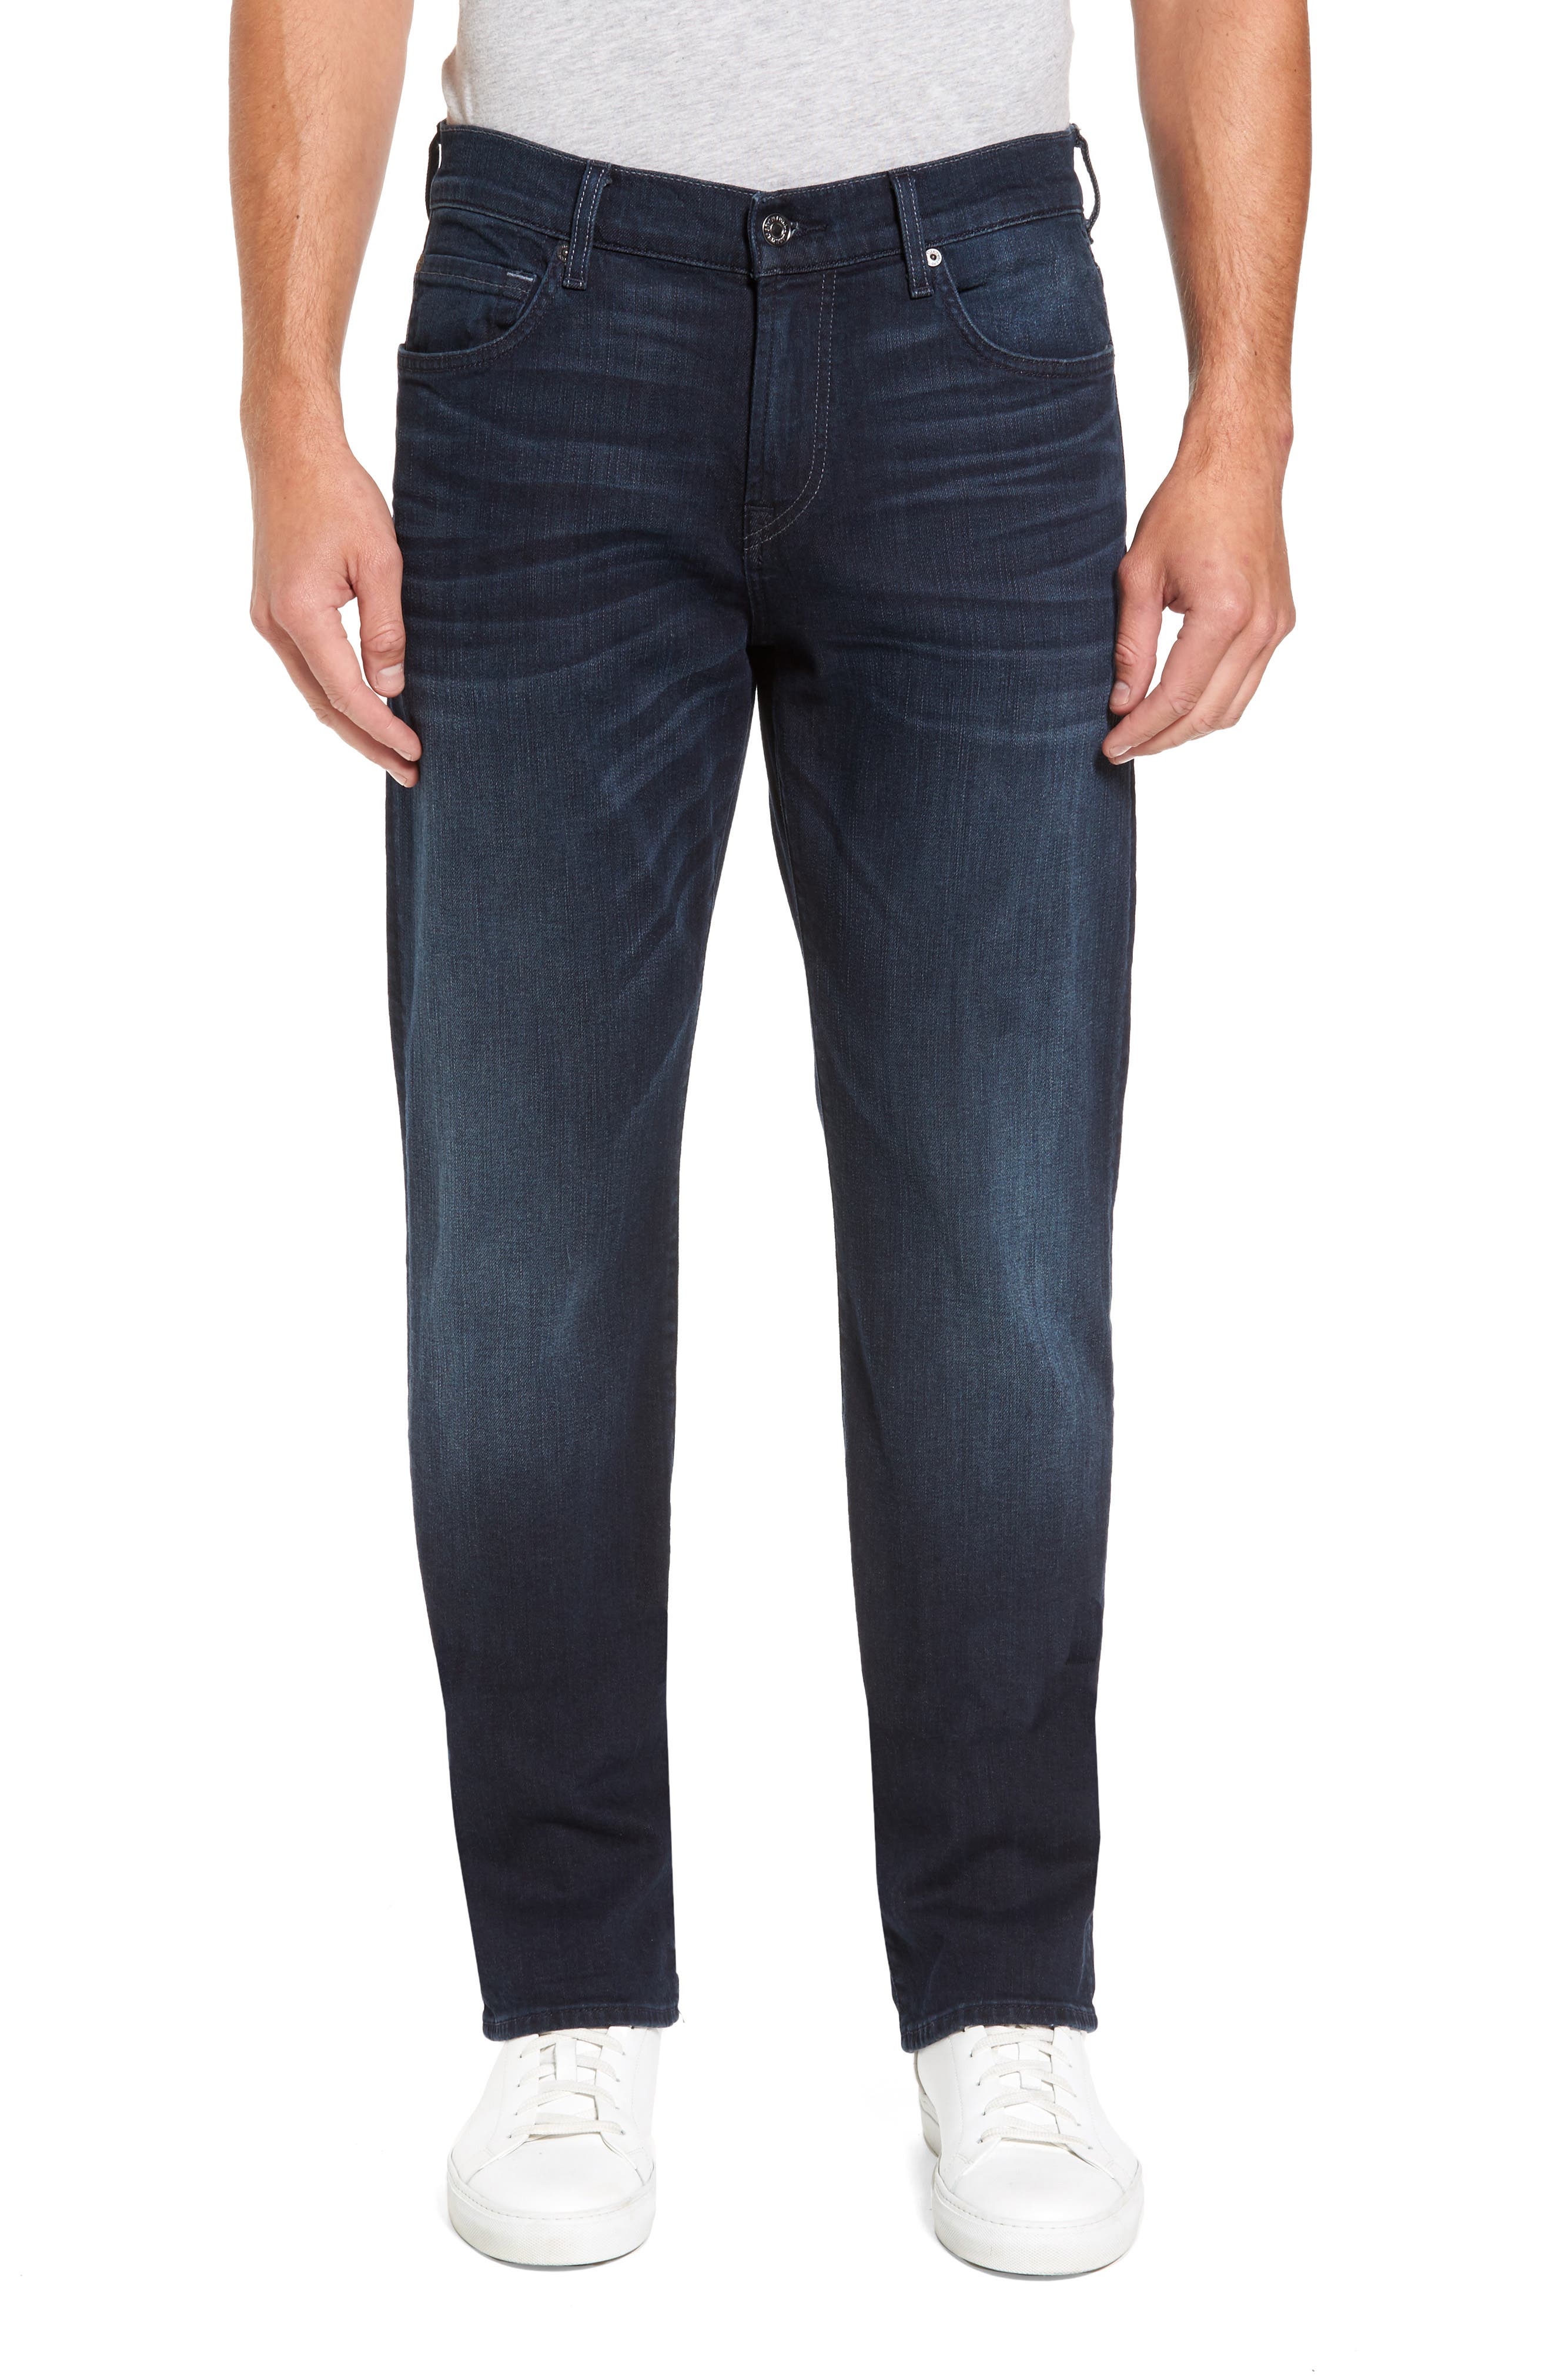 7 for all mankind carsen jeans